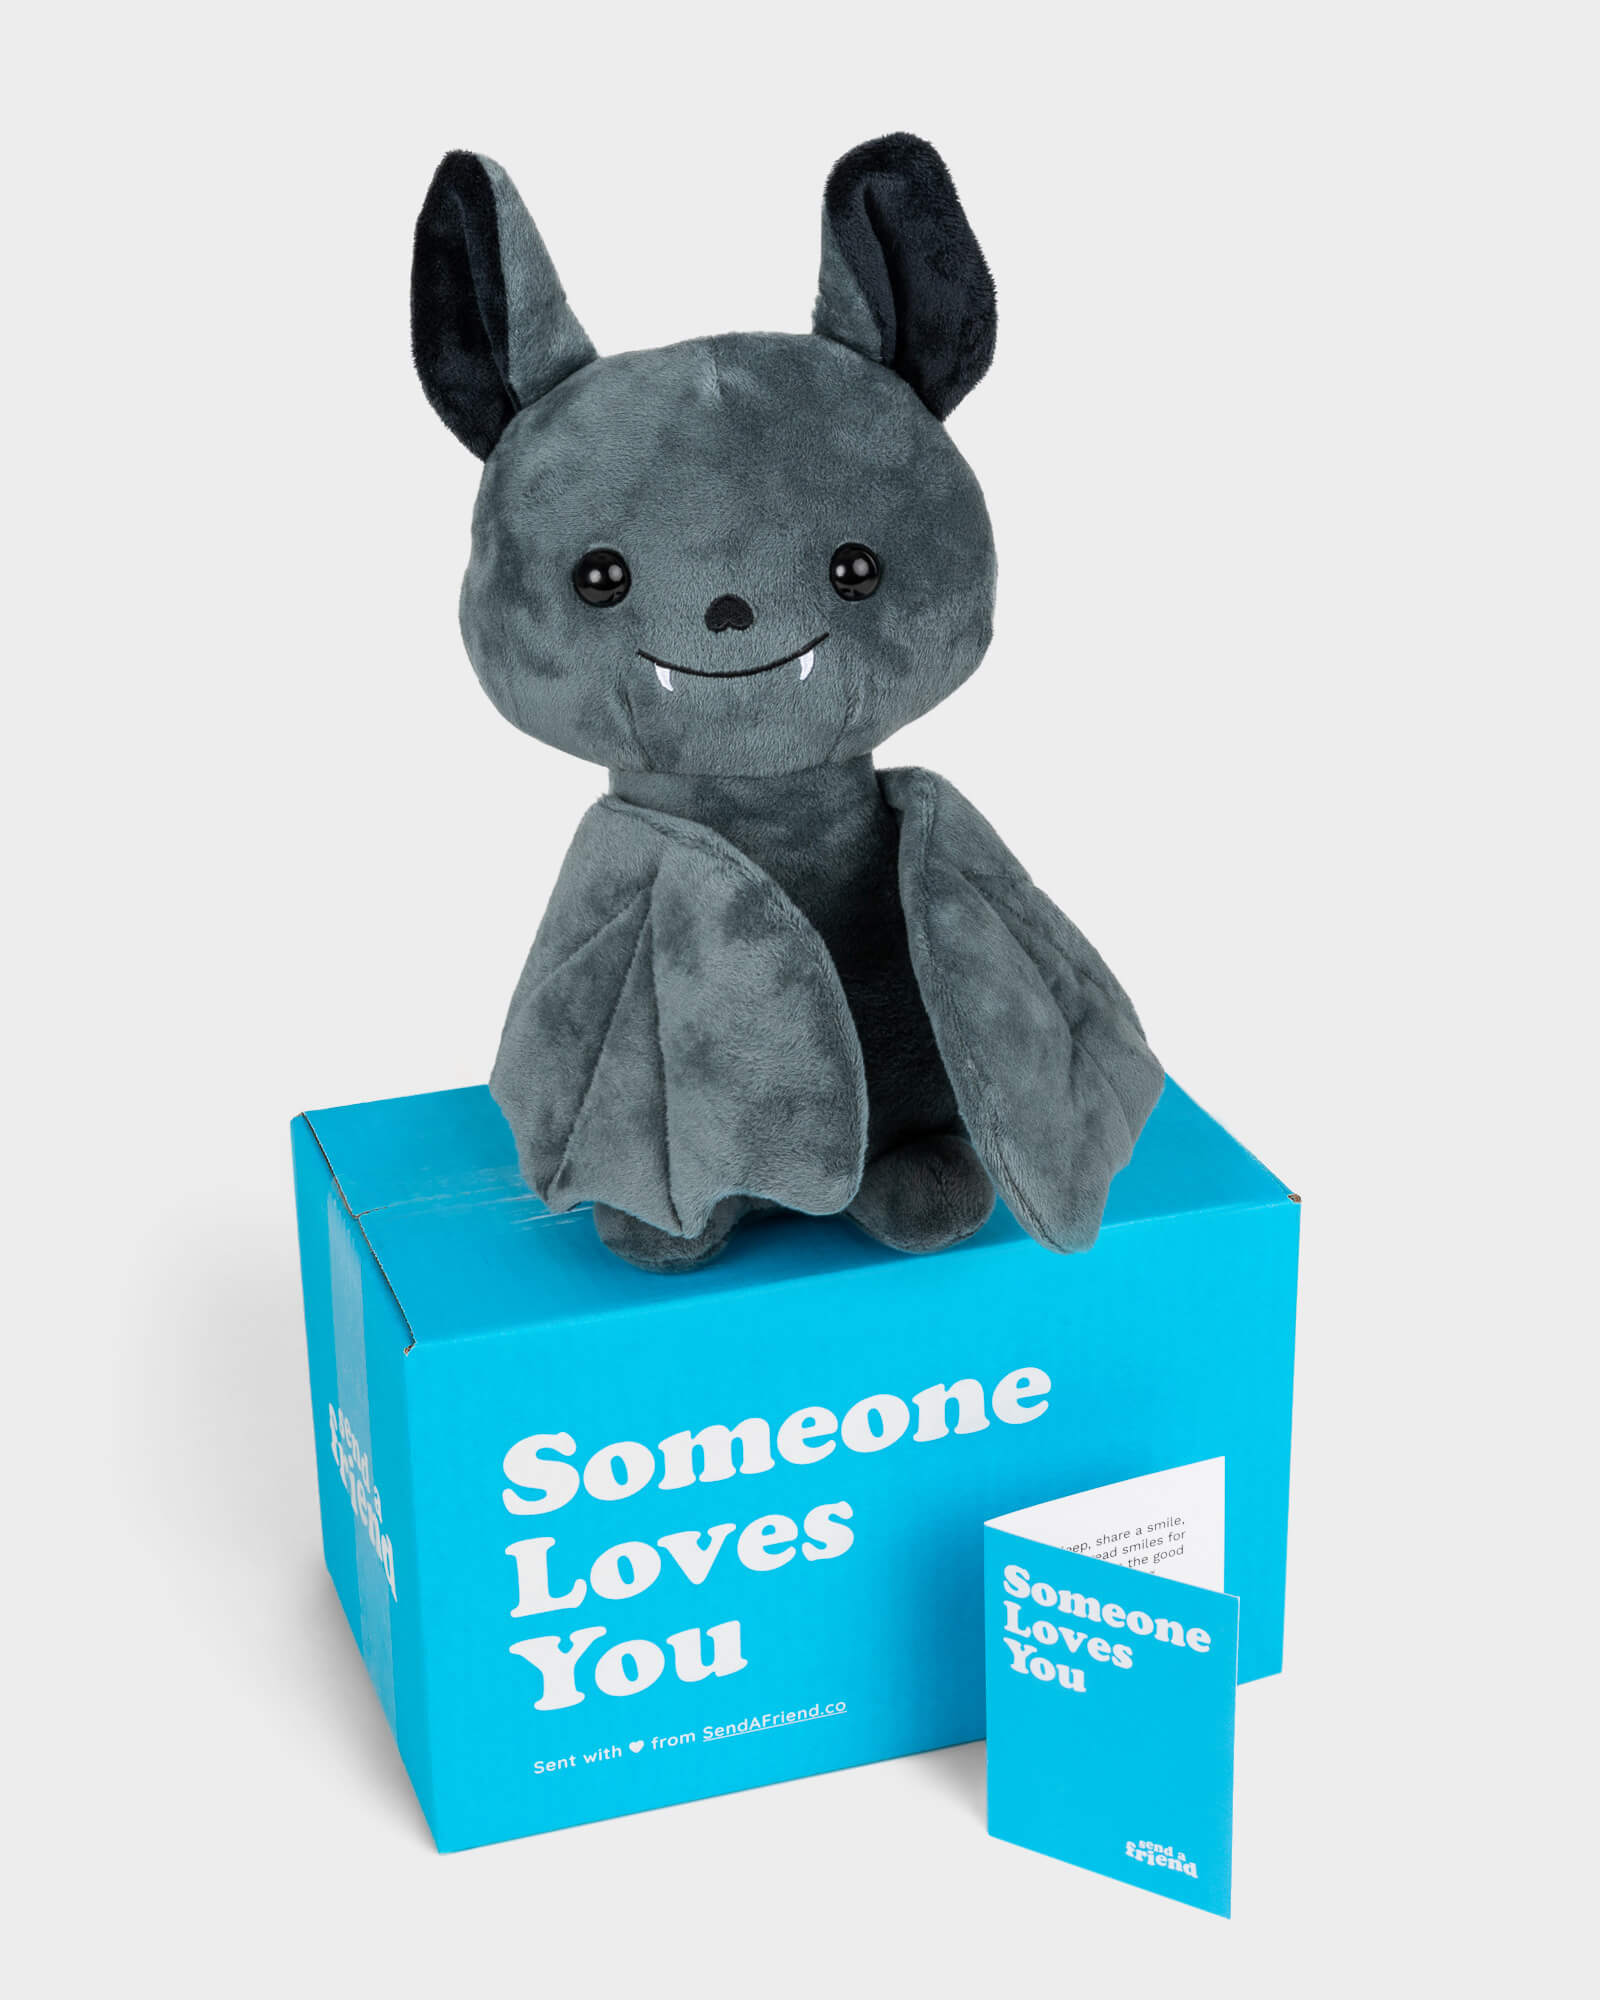 Shop All Stuffed Animal Care Packages